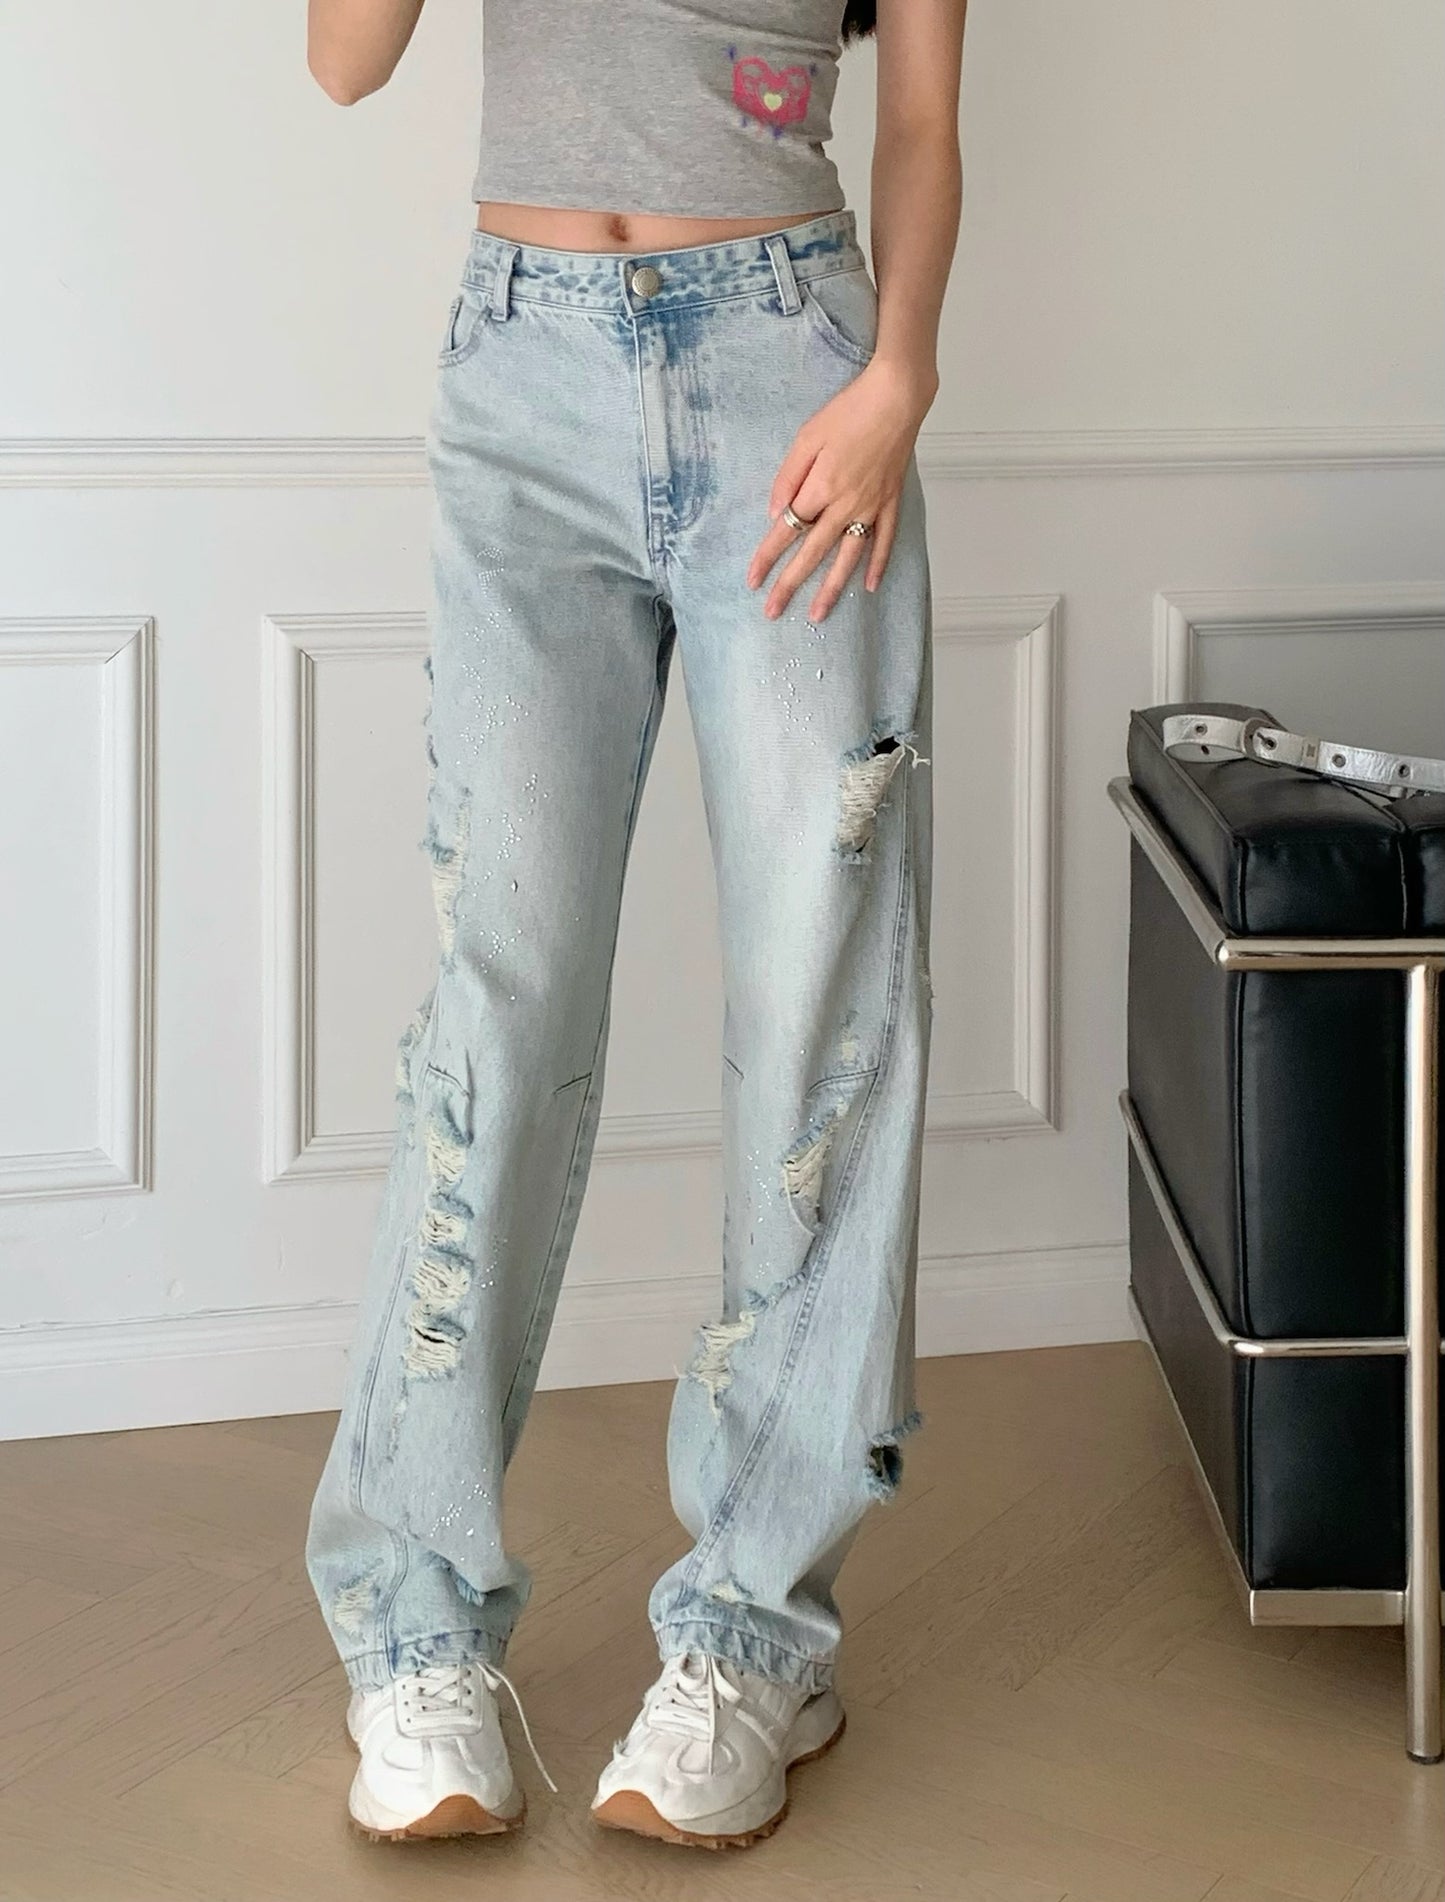 Crystal-embellished Ripped Jeans